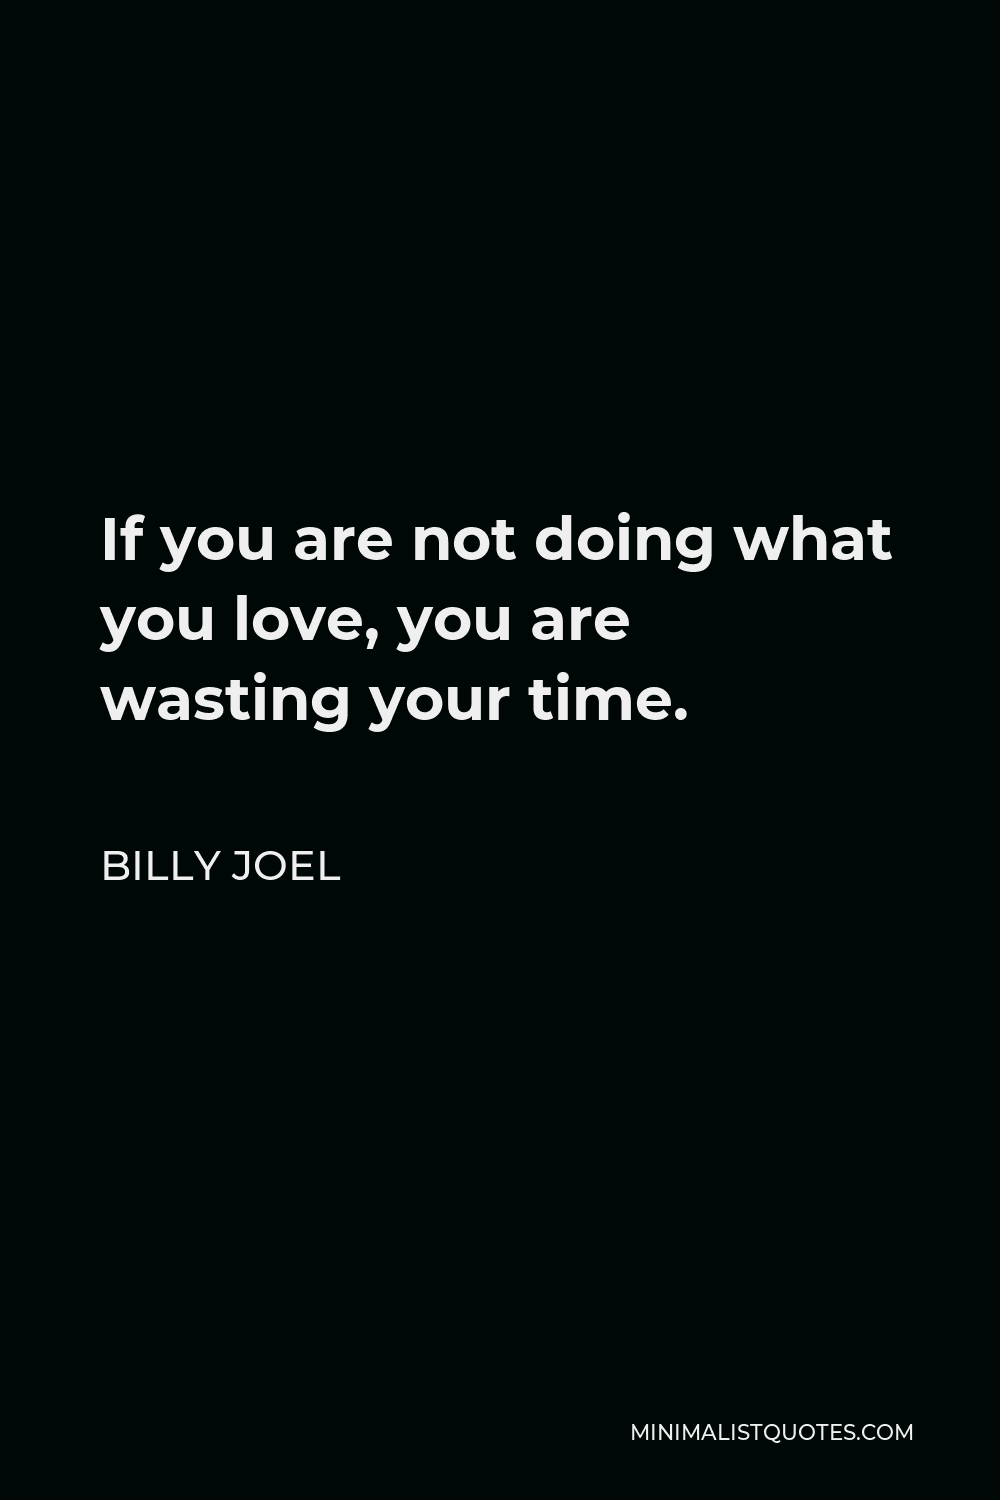 Billy Joel Quote - If you are not doing what you love, you are wasting your time.